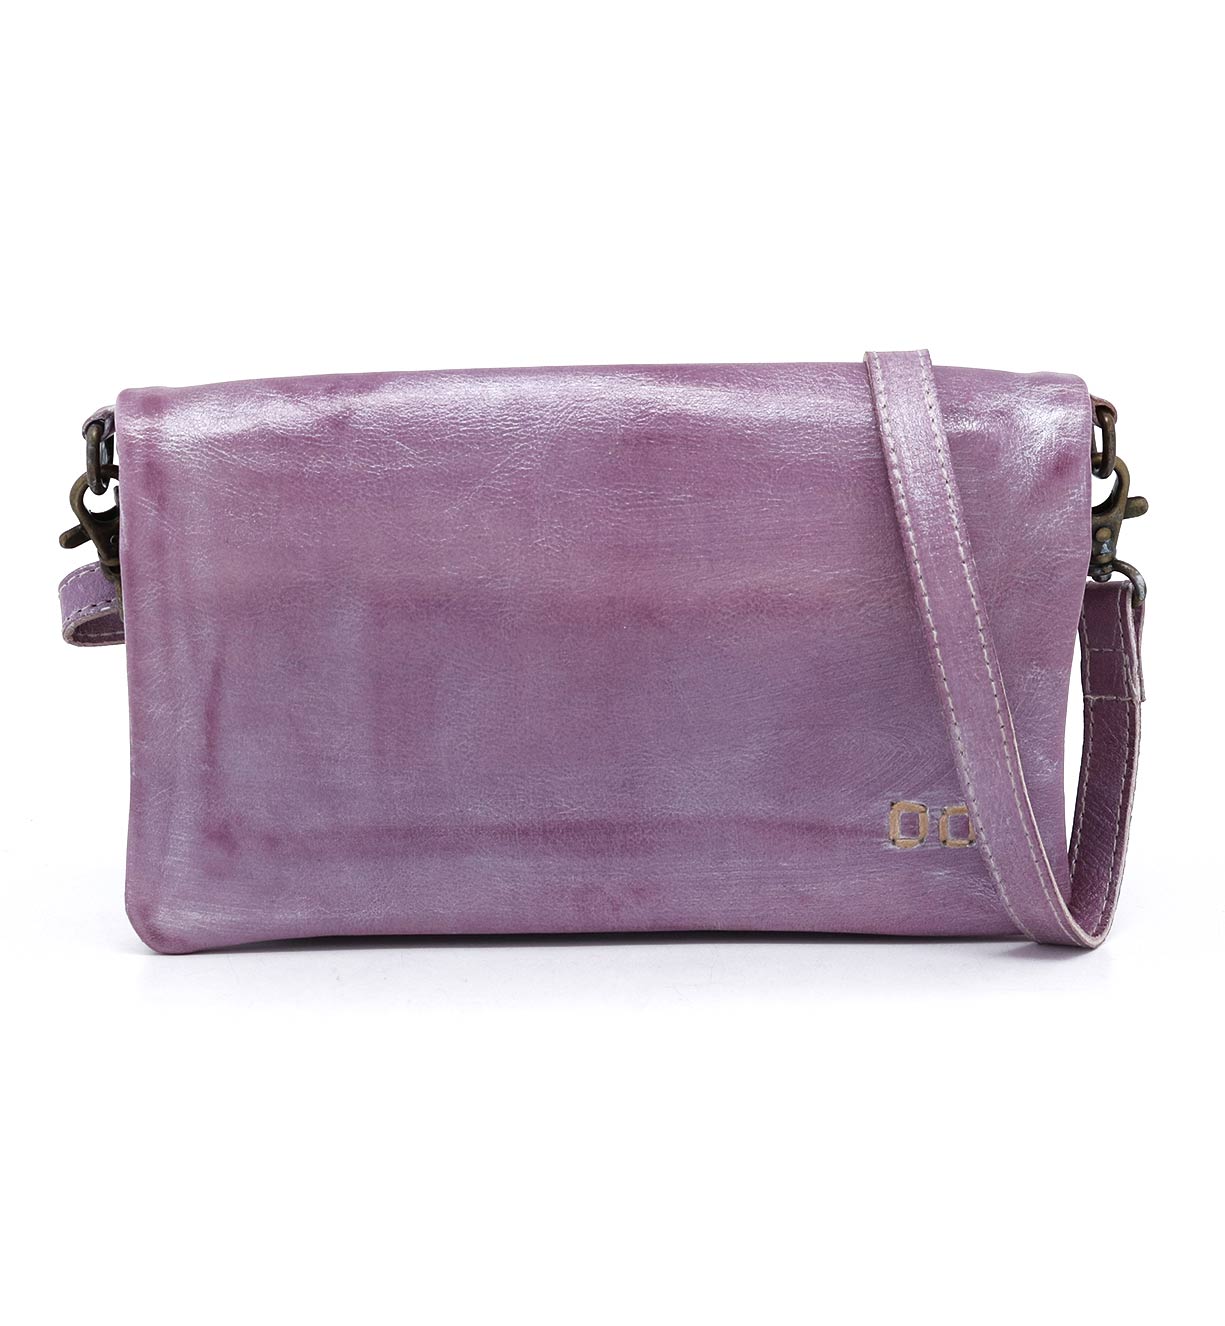 A lilac leather Cadence crossbody bag with a leather strap from Bed Stu.